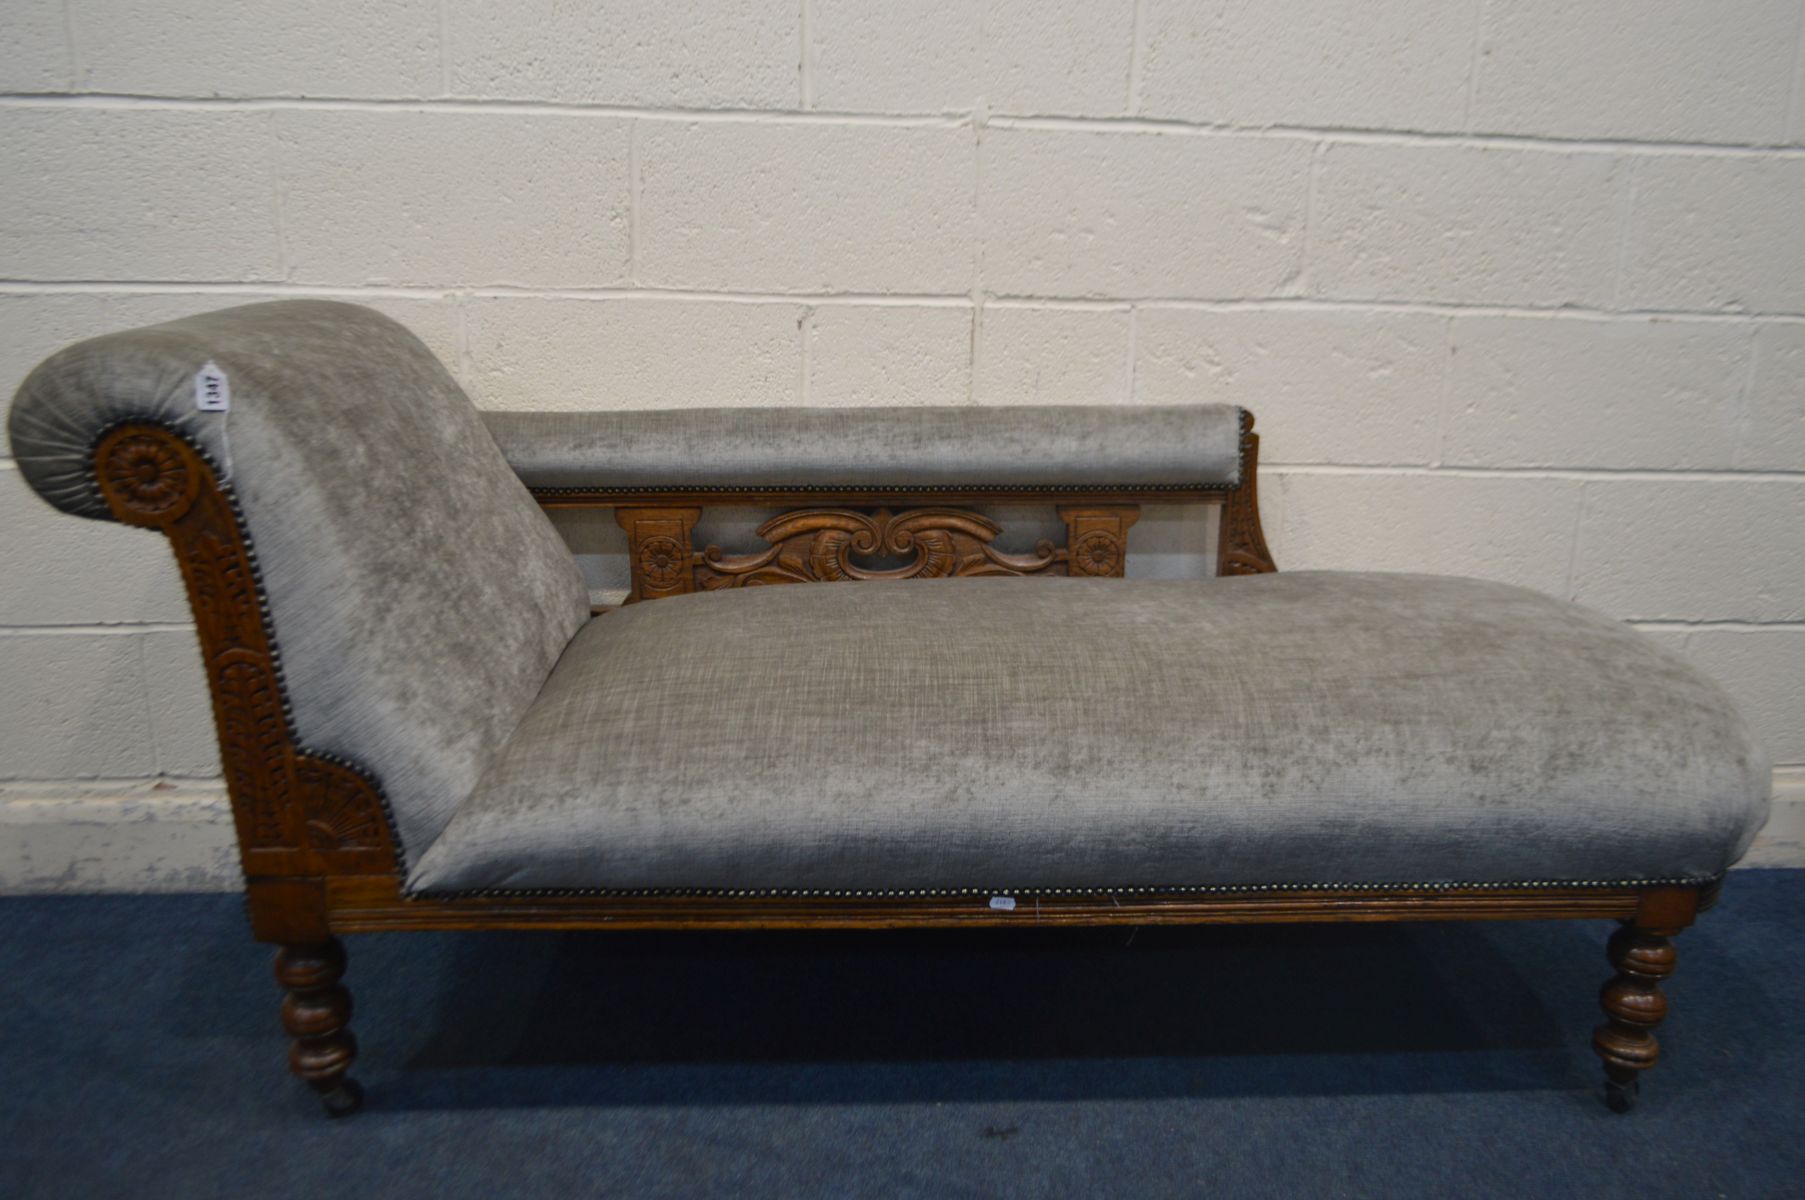 A EDWARDIAN CARVED OAK CHAISE LONGUE, reupholstered in grey, length 177cm - Image 2 of 4